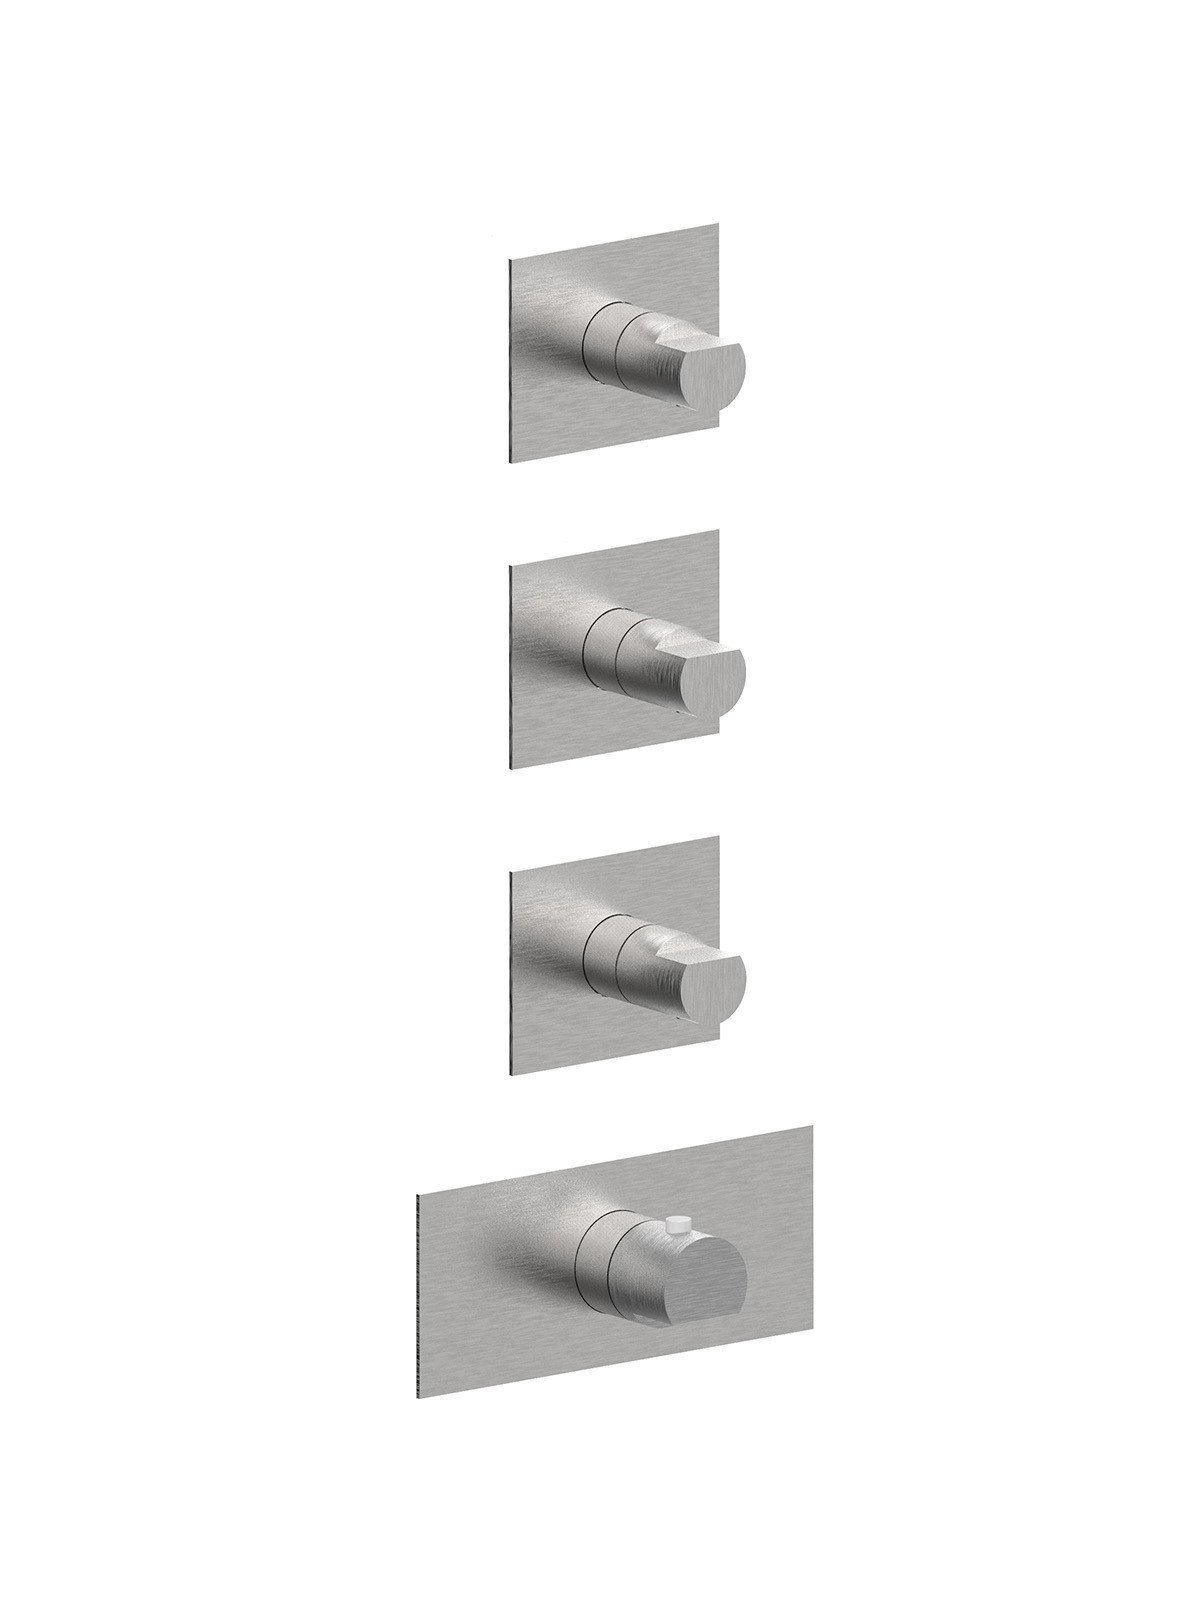 External components 3-way thermostatic built-in shower manifold